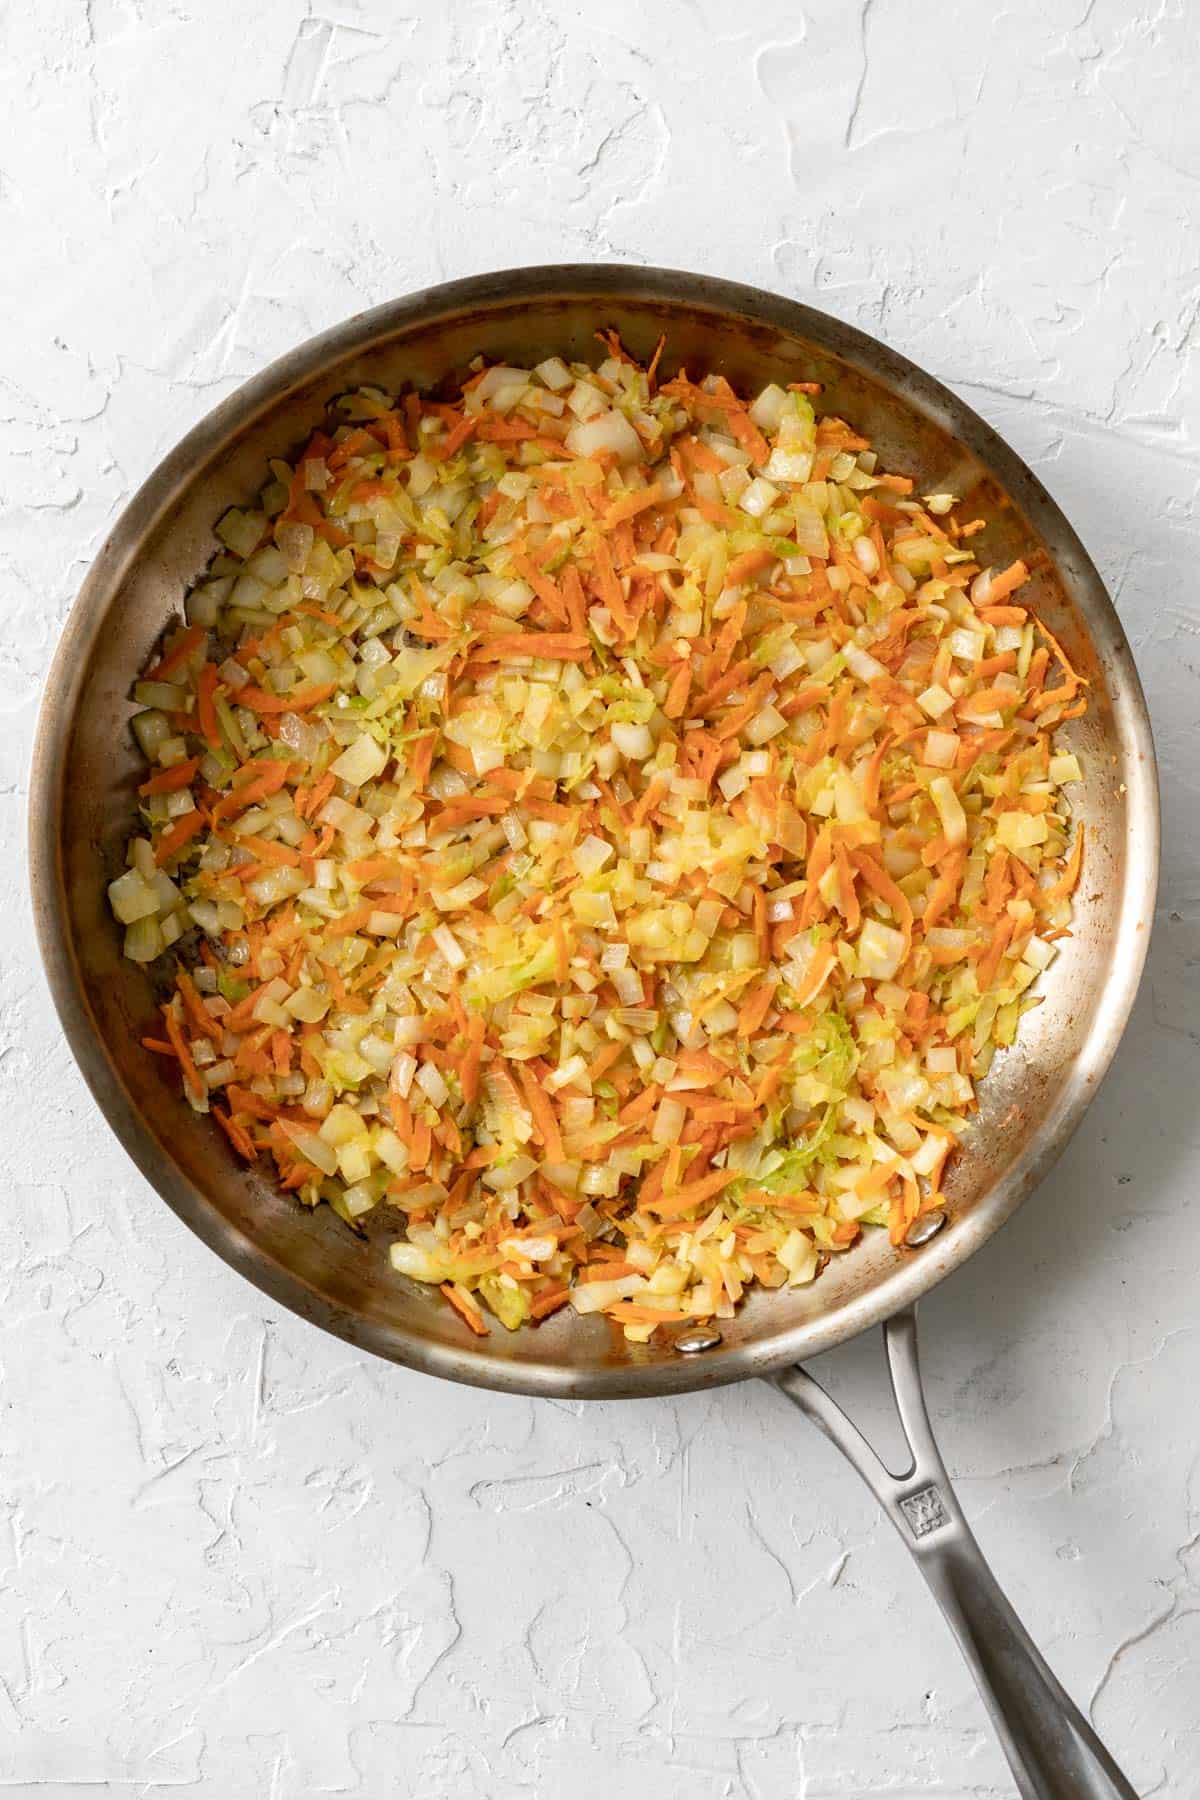 Shredded carrots, celery, onions, and garlic cooking in a metal skillet.